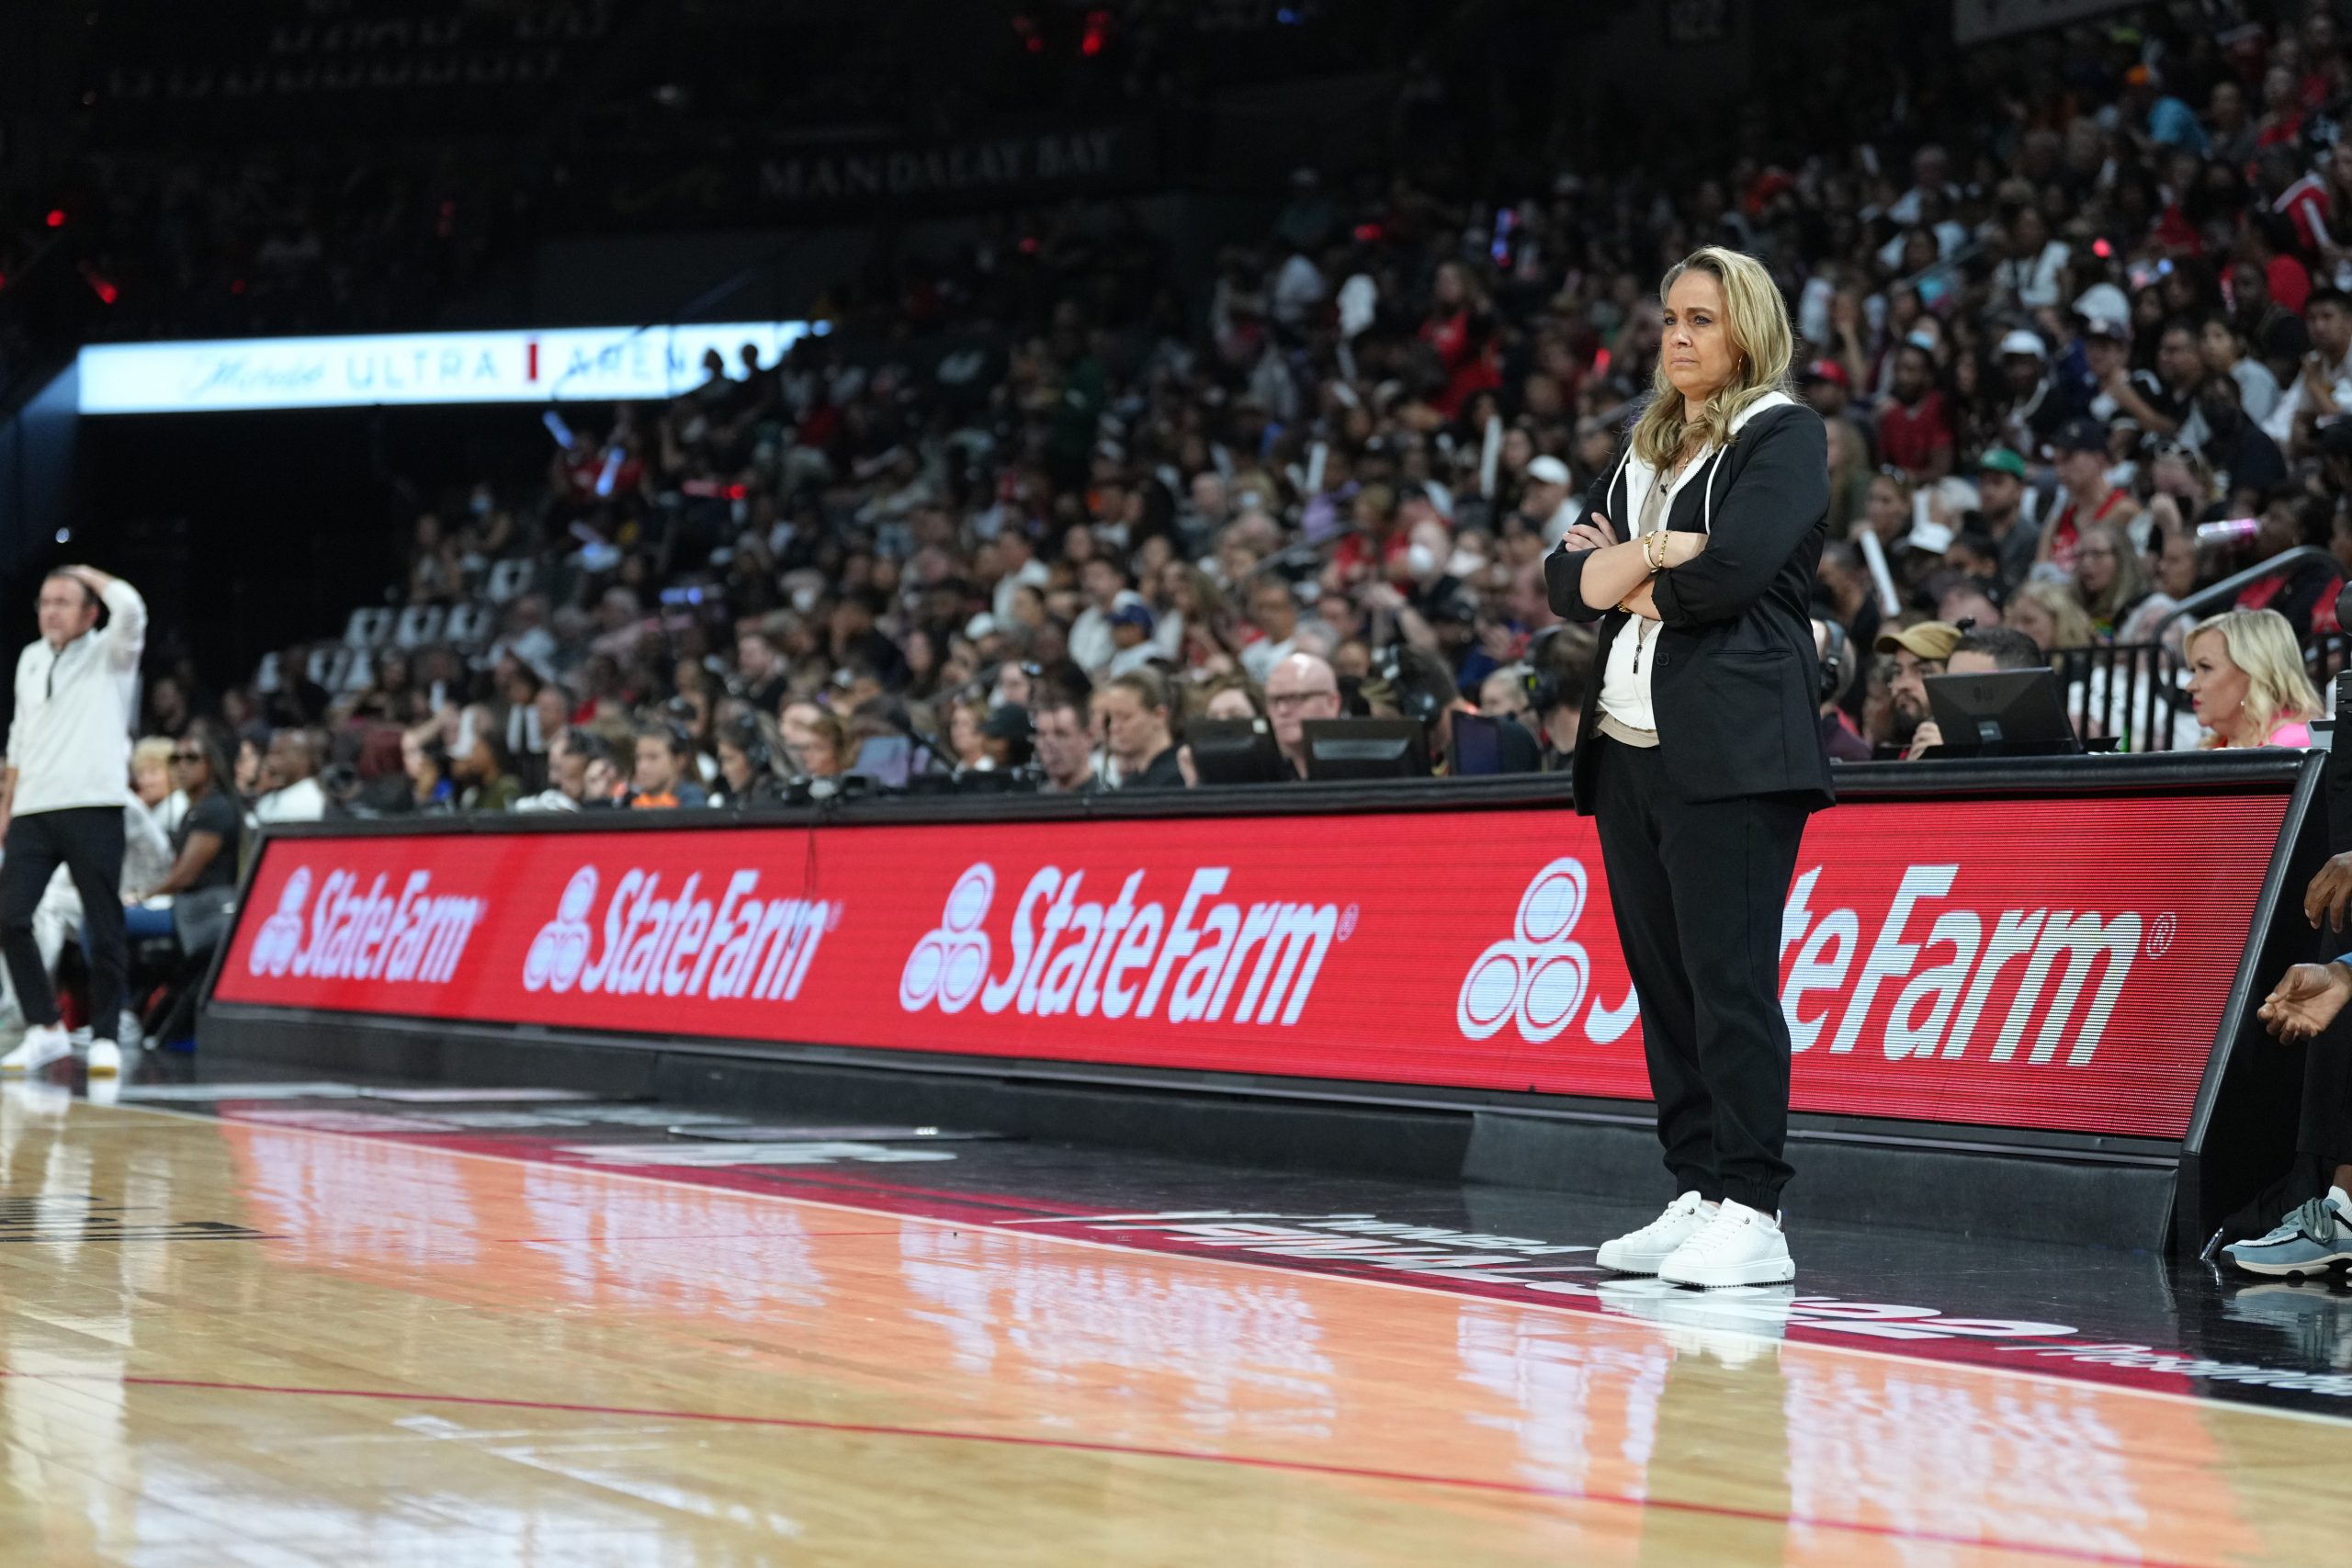 Becky Hammon On Being Snubbed For NBA Jobs: ‘I Just Do Me’